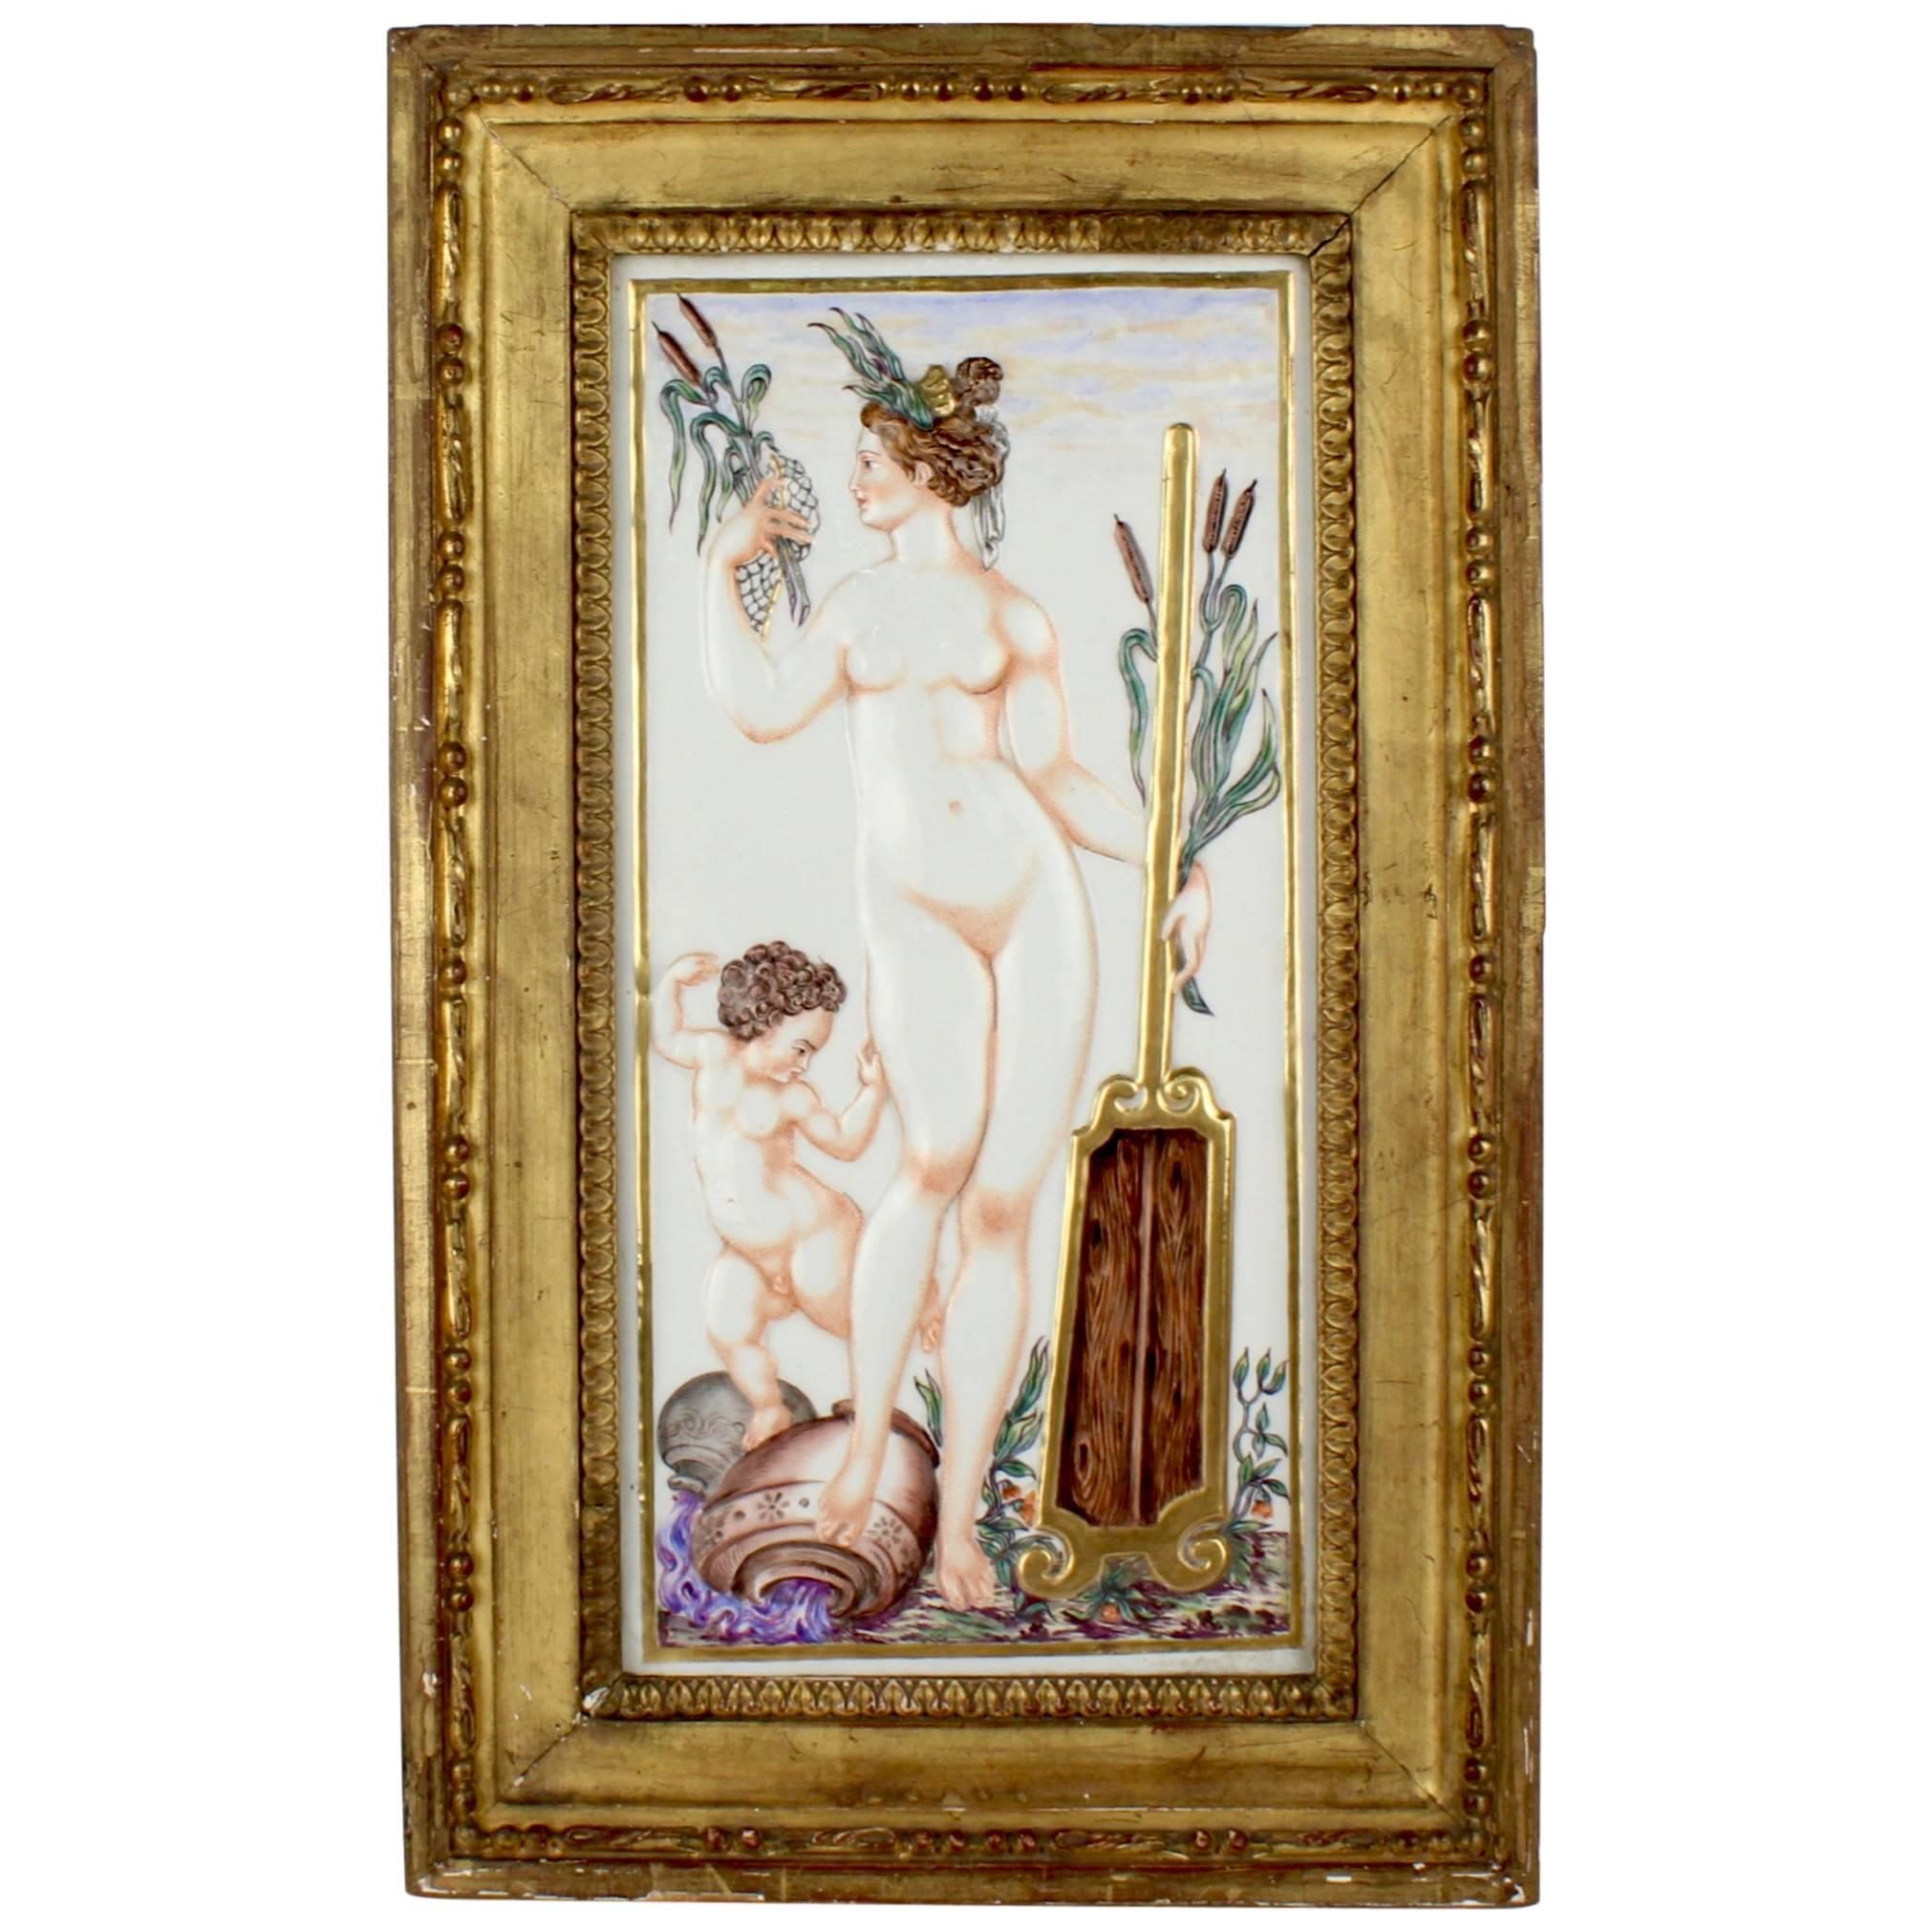 Large Antique Capodimonte Porcelain Plaque of a Naiad or Water Nymph